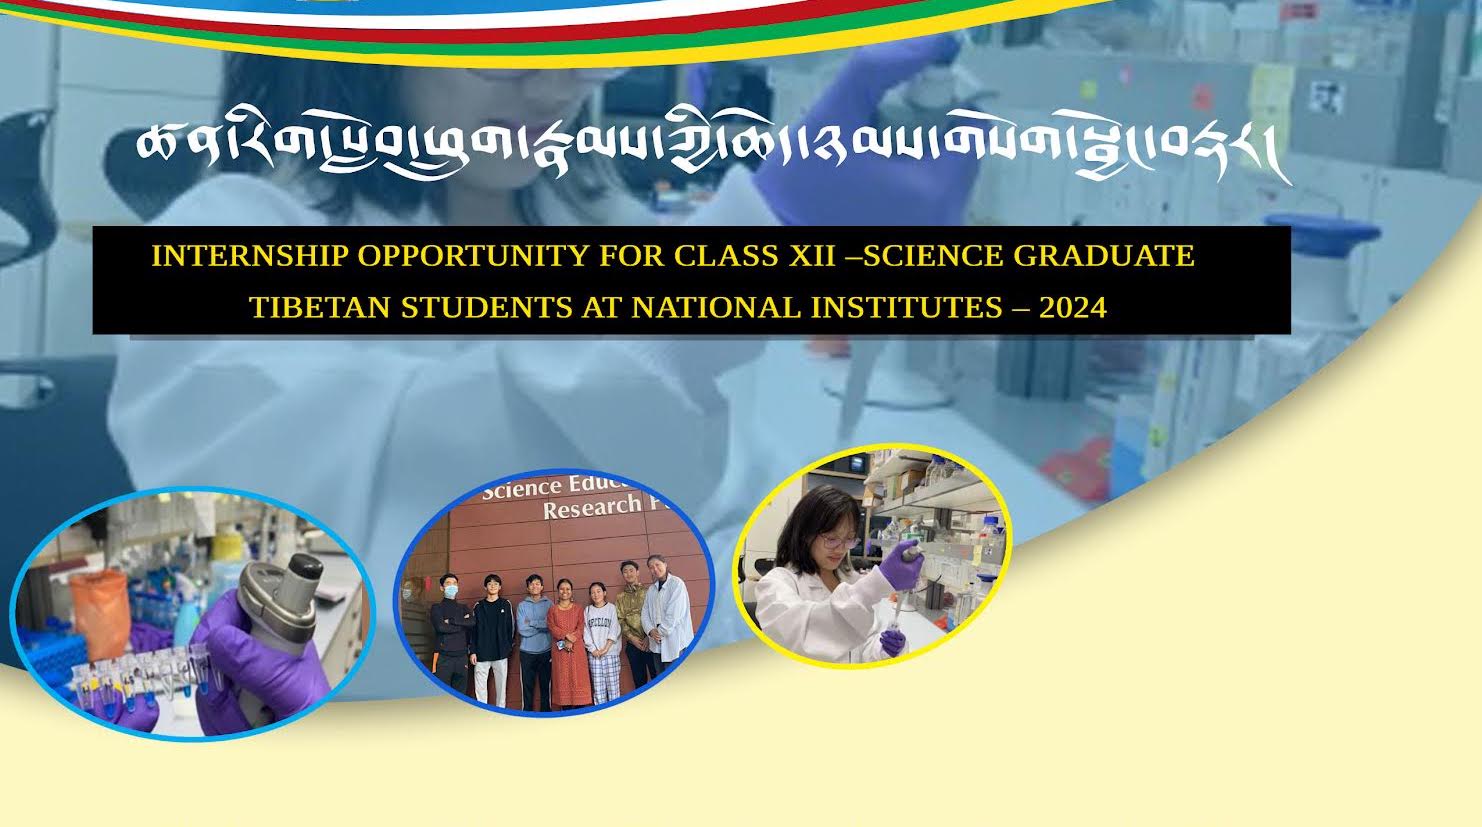 Internship Opportunity for Tibetan Class XII Science Graduates of 2024 at National Institutes